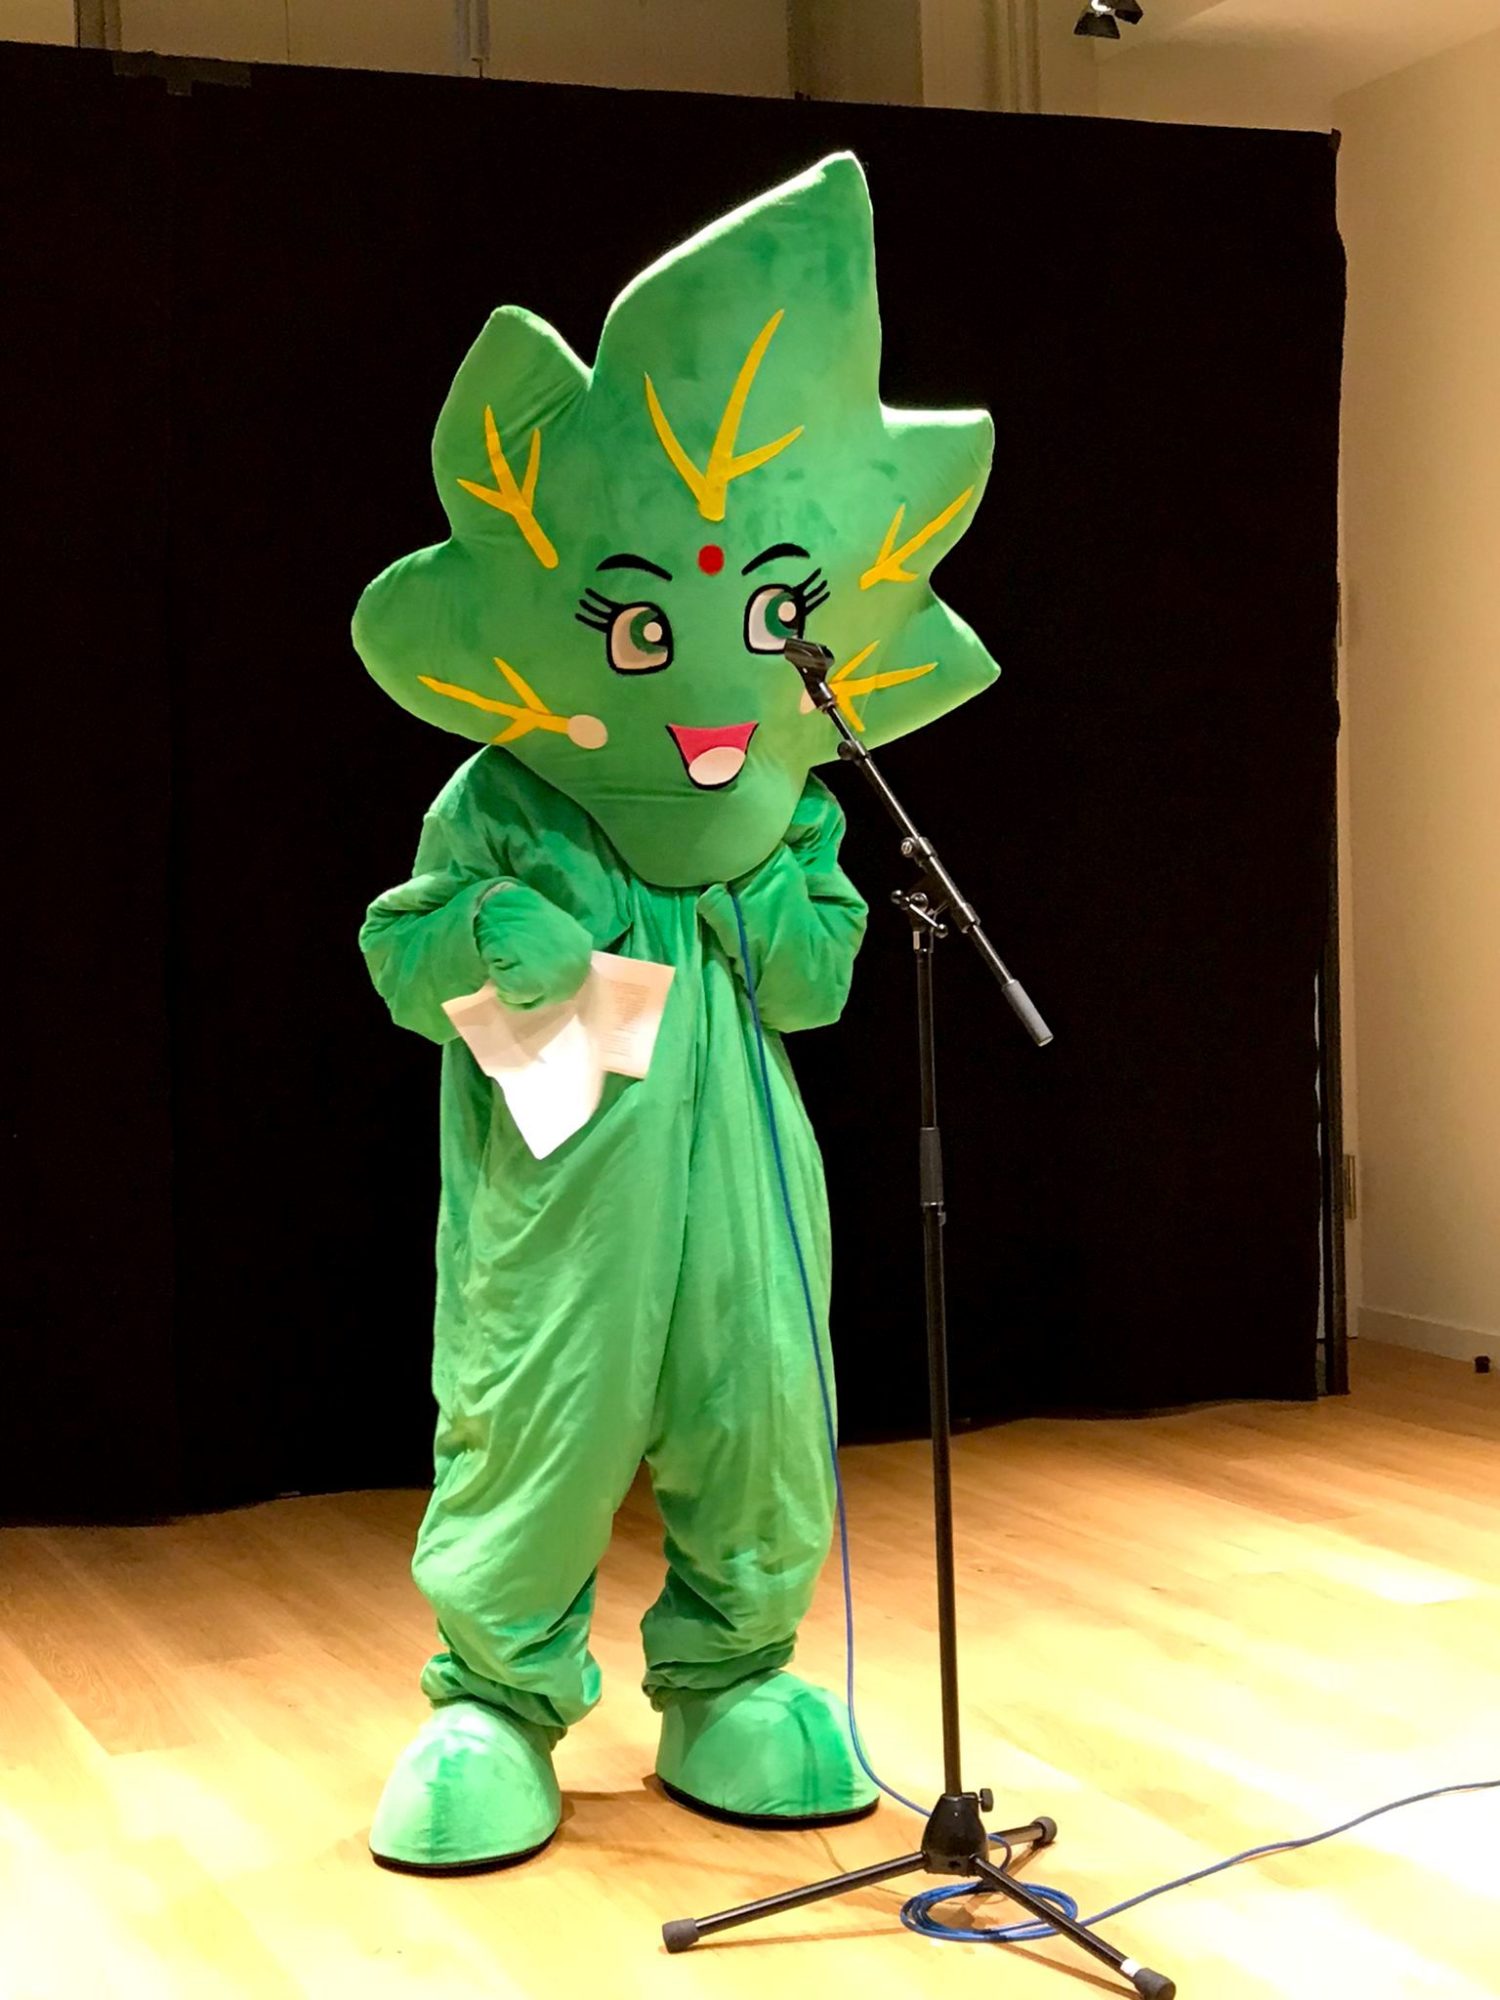 The mascot is representing The Montesinos Federation and Die Unkraut Boschaft (Weed Embassy)